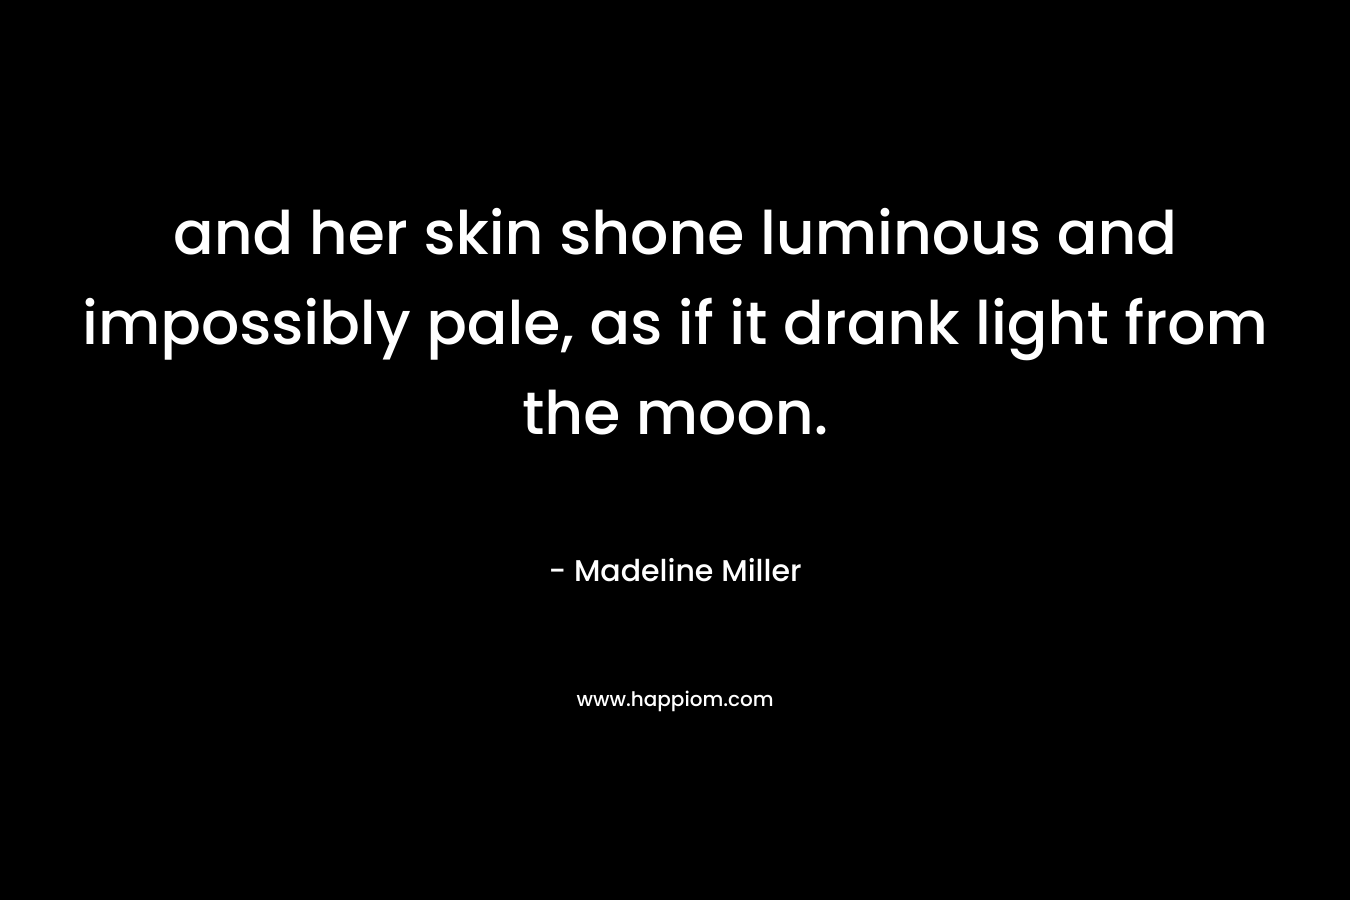 and her skin shone luminous and impossibly pale, as if it drank light from the moon.